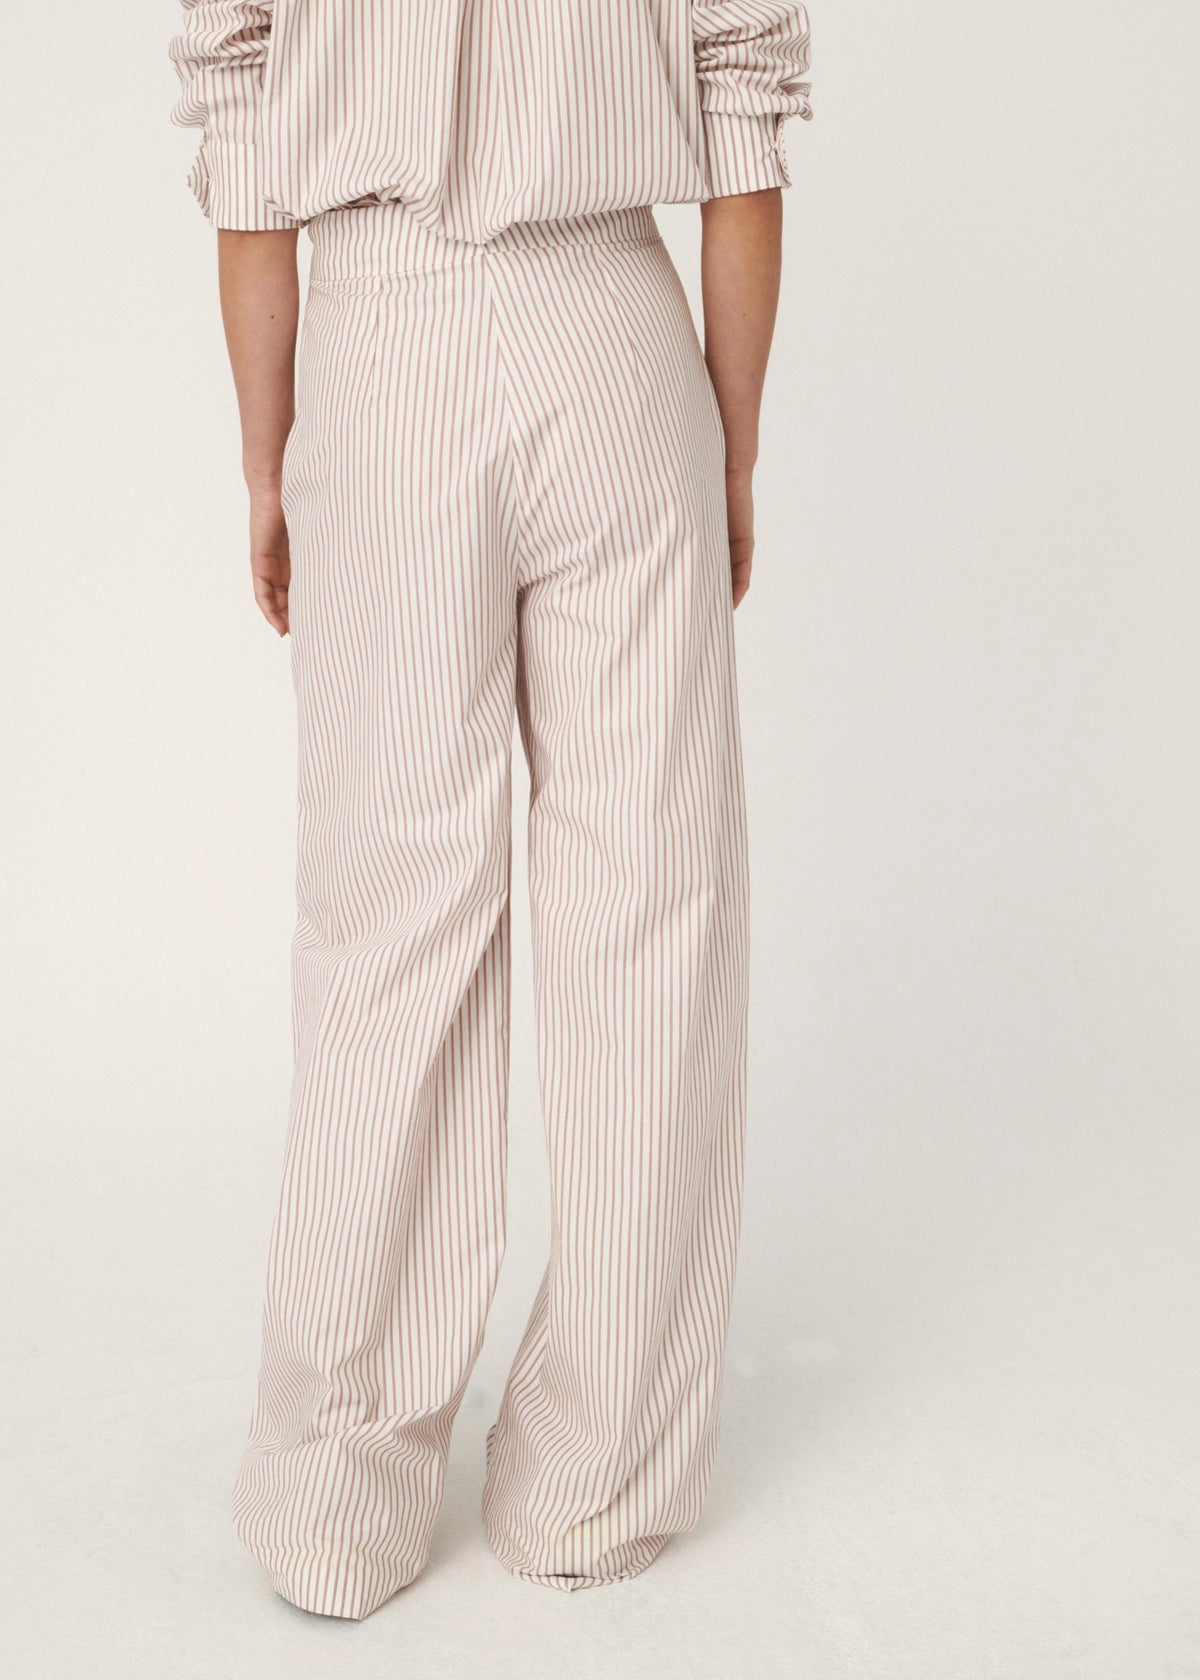 WHITE AND MAROON STRIPE PALAZZO TROUSERS